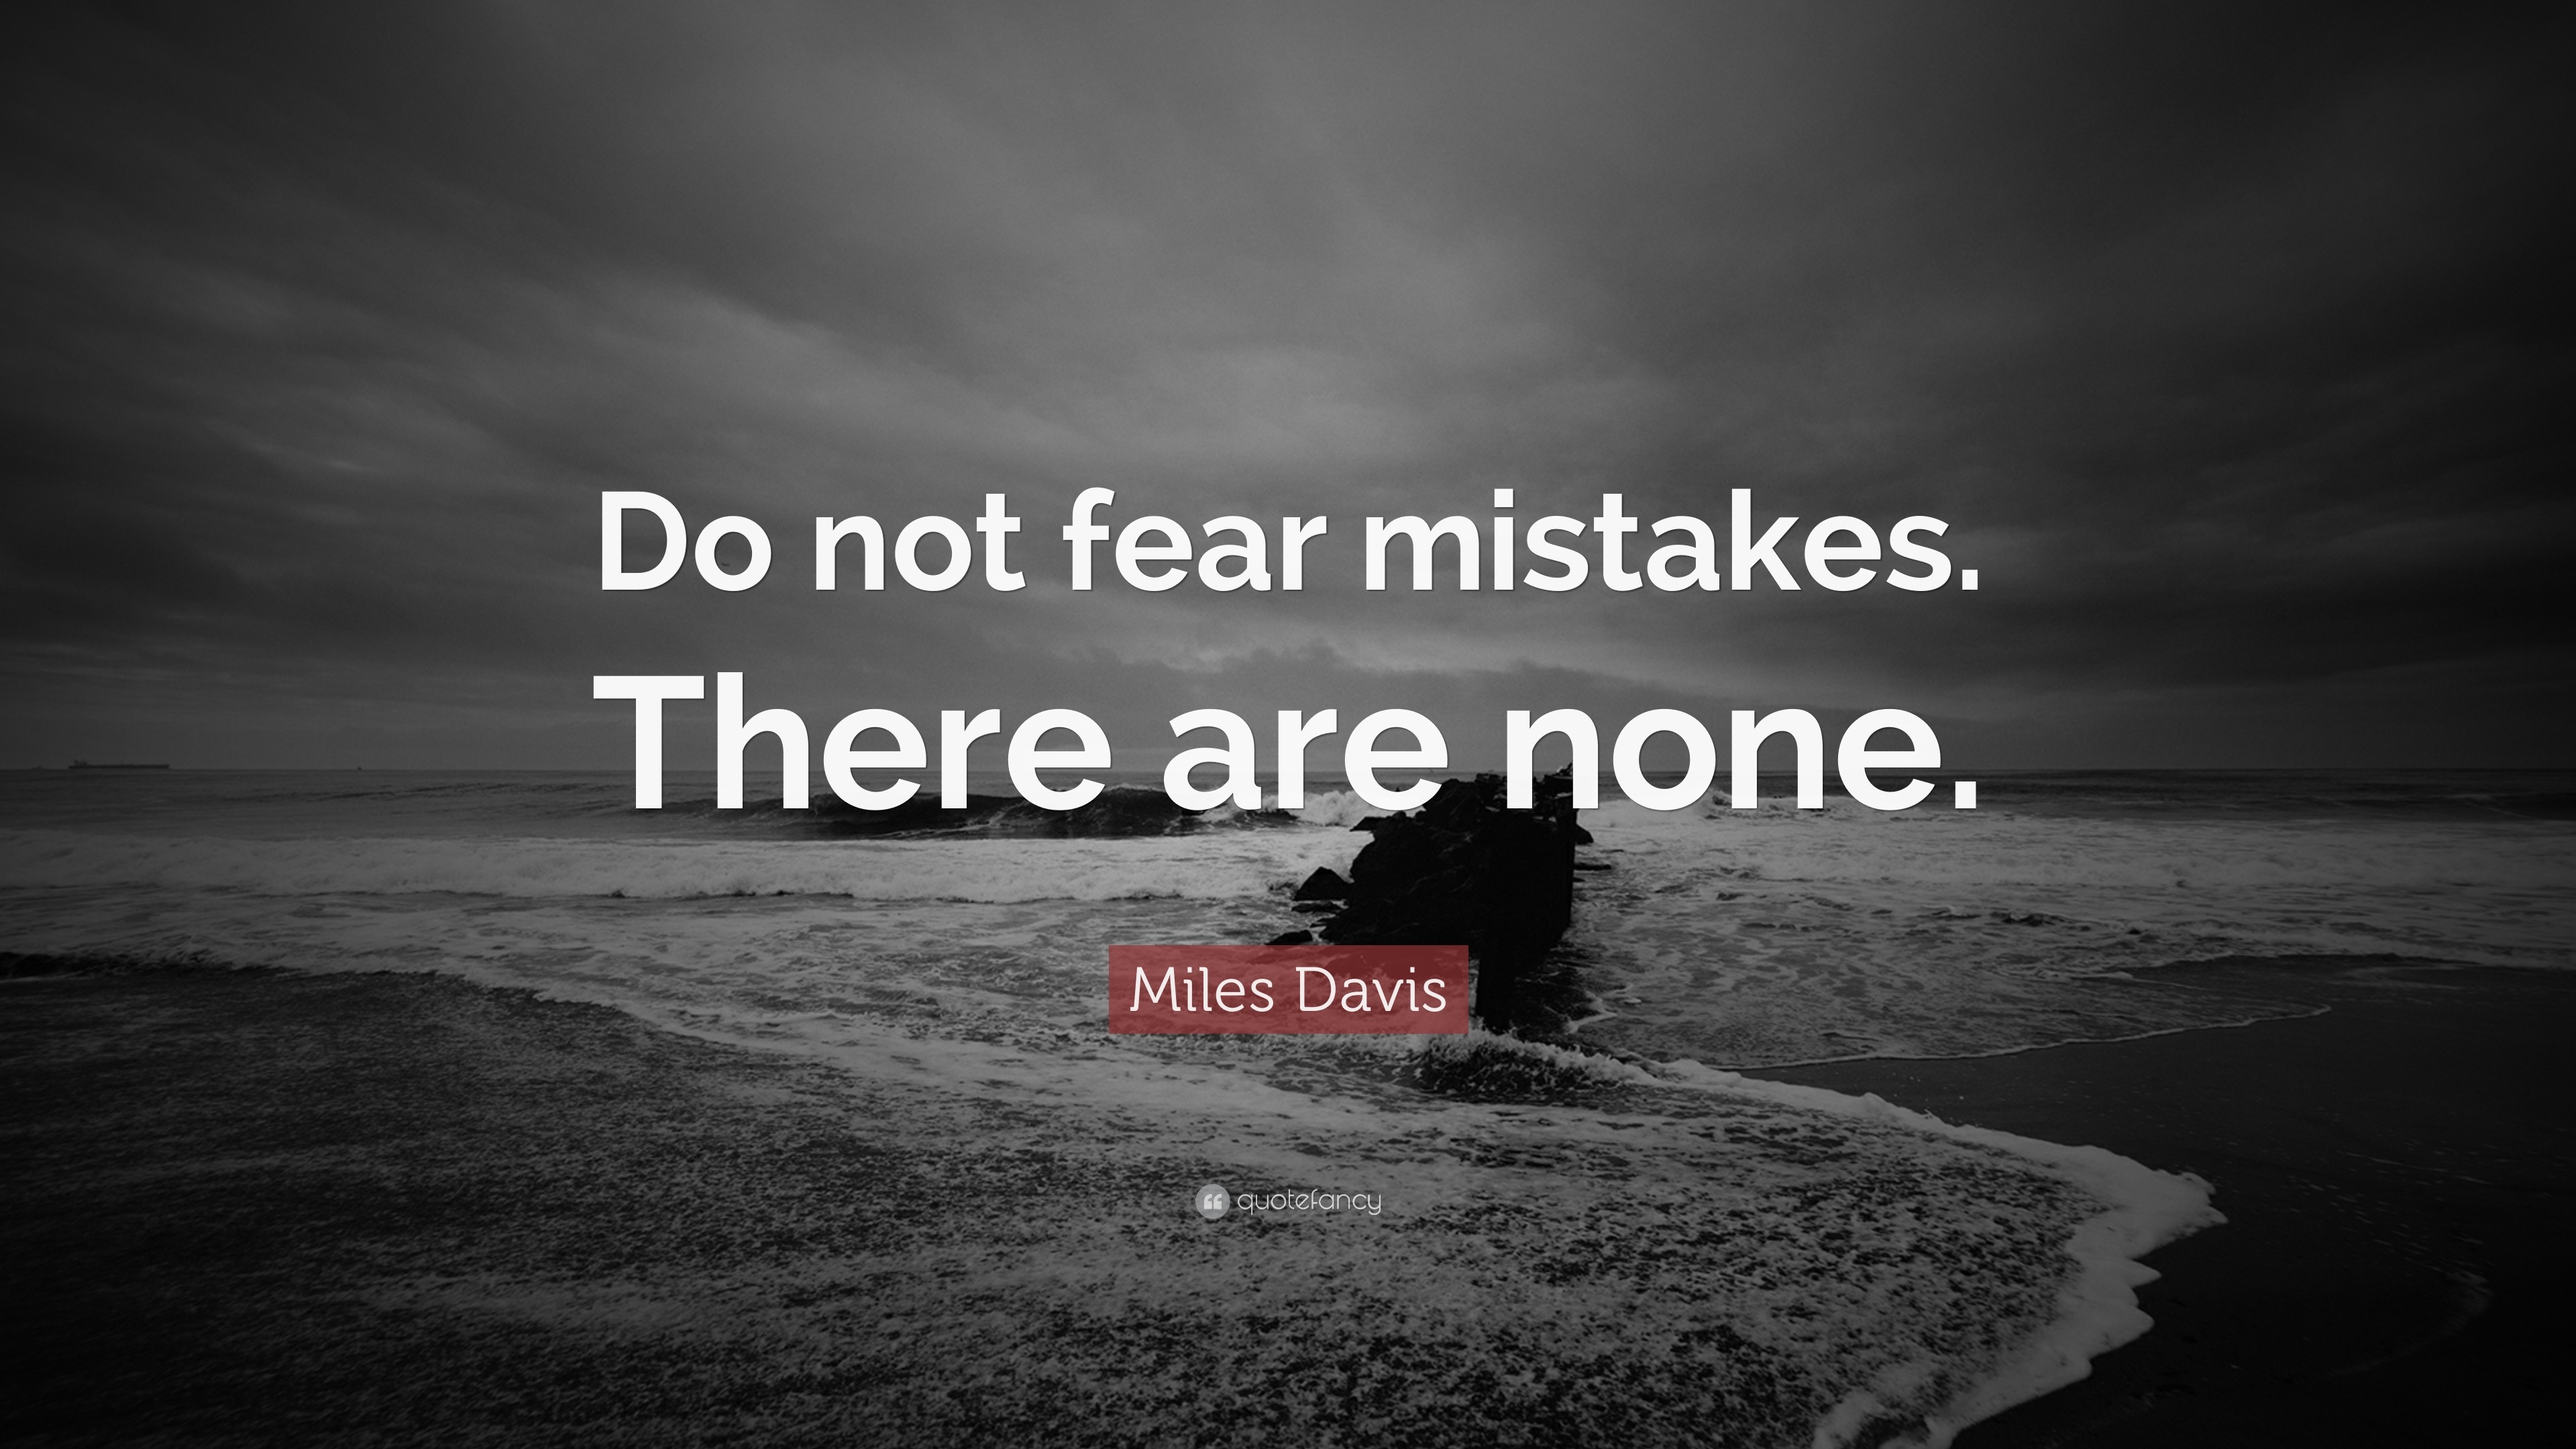 3840x2160 Miles Davis Quote: “Do not fear mistakes. There are none.”